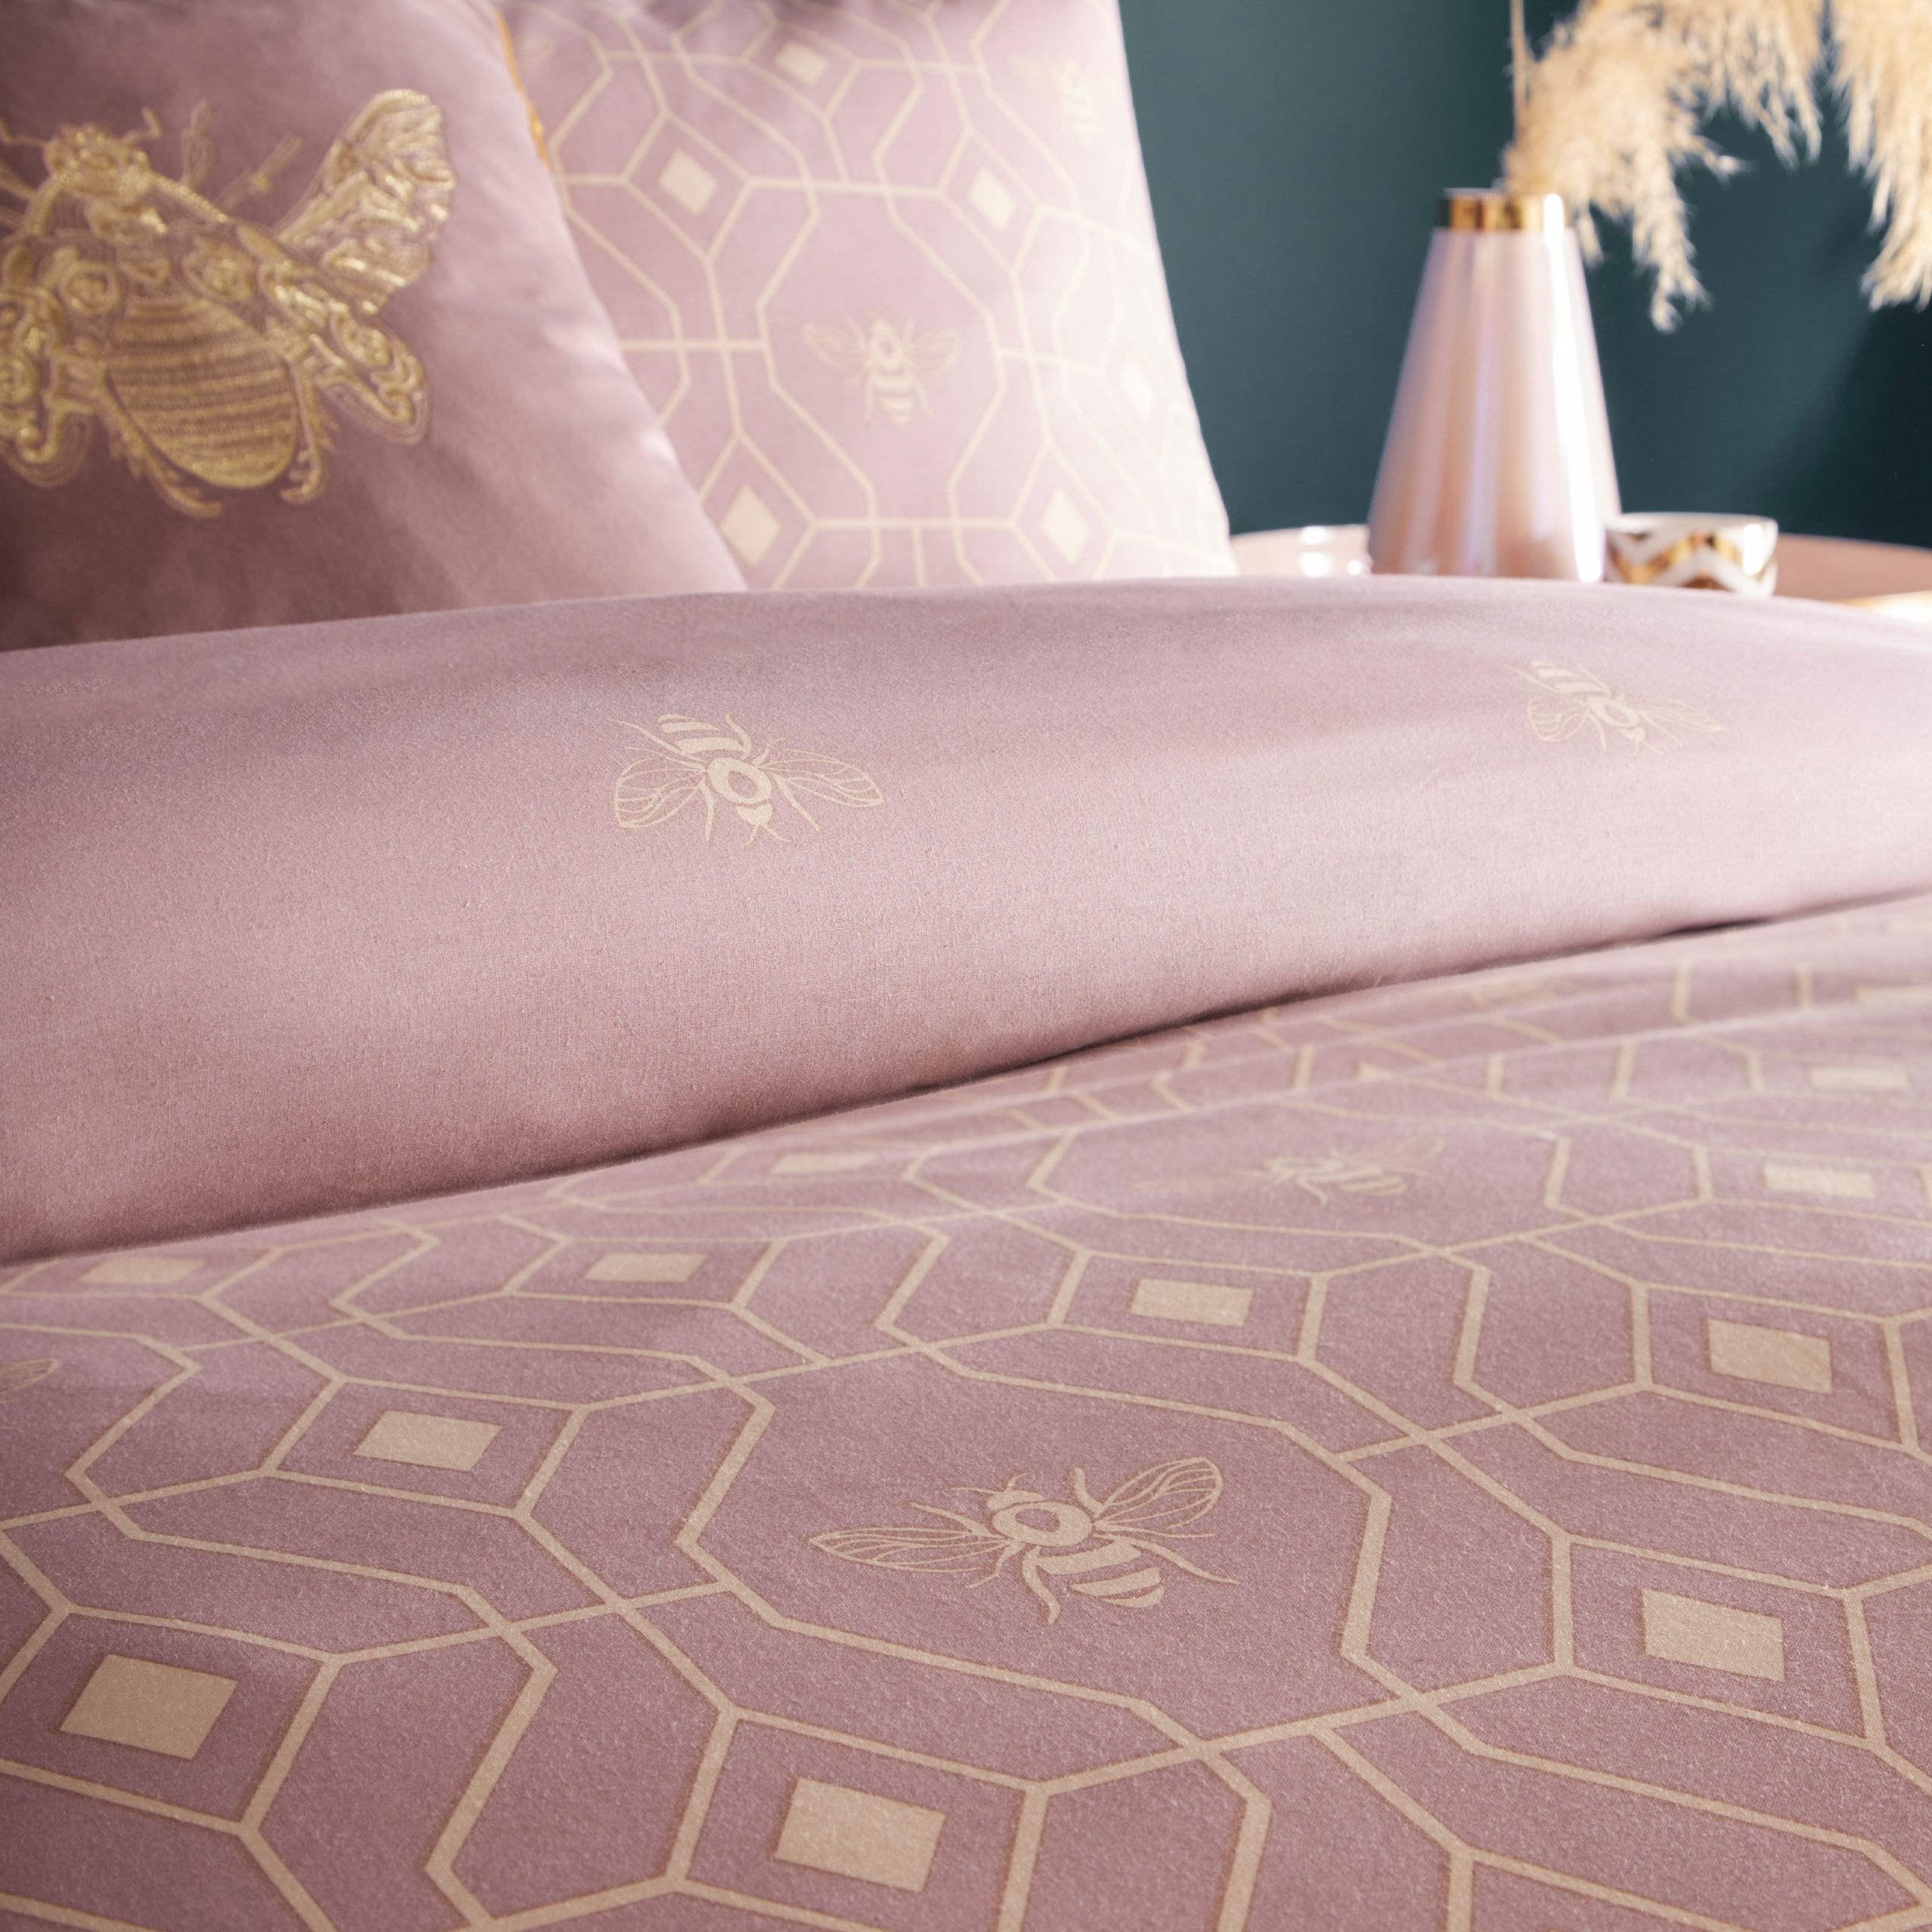 The Bee Deco Duvet Cover and Pillow Case Set fuses the royal bee with a soft gold geometric design on a blush pink background. Bringing elegance and style to your bedroom, this bedding set is complete with a reversible design, clear button closure and easy care properties.
Measurements are as below for each size in this range;
Single: 137 x 200cm (includes one matching pillowcase)
Double: 200 200cm (includes two matching pillowcases)
King: 230 x 220cm (includes two matching pillowcases)
Super King: 260 x 220cm (includes two matching pillowcases)